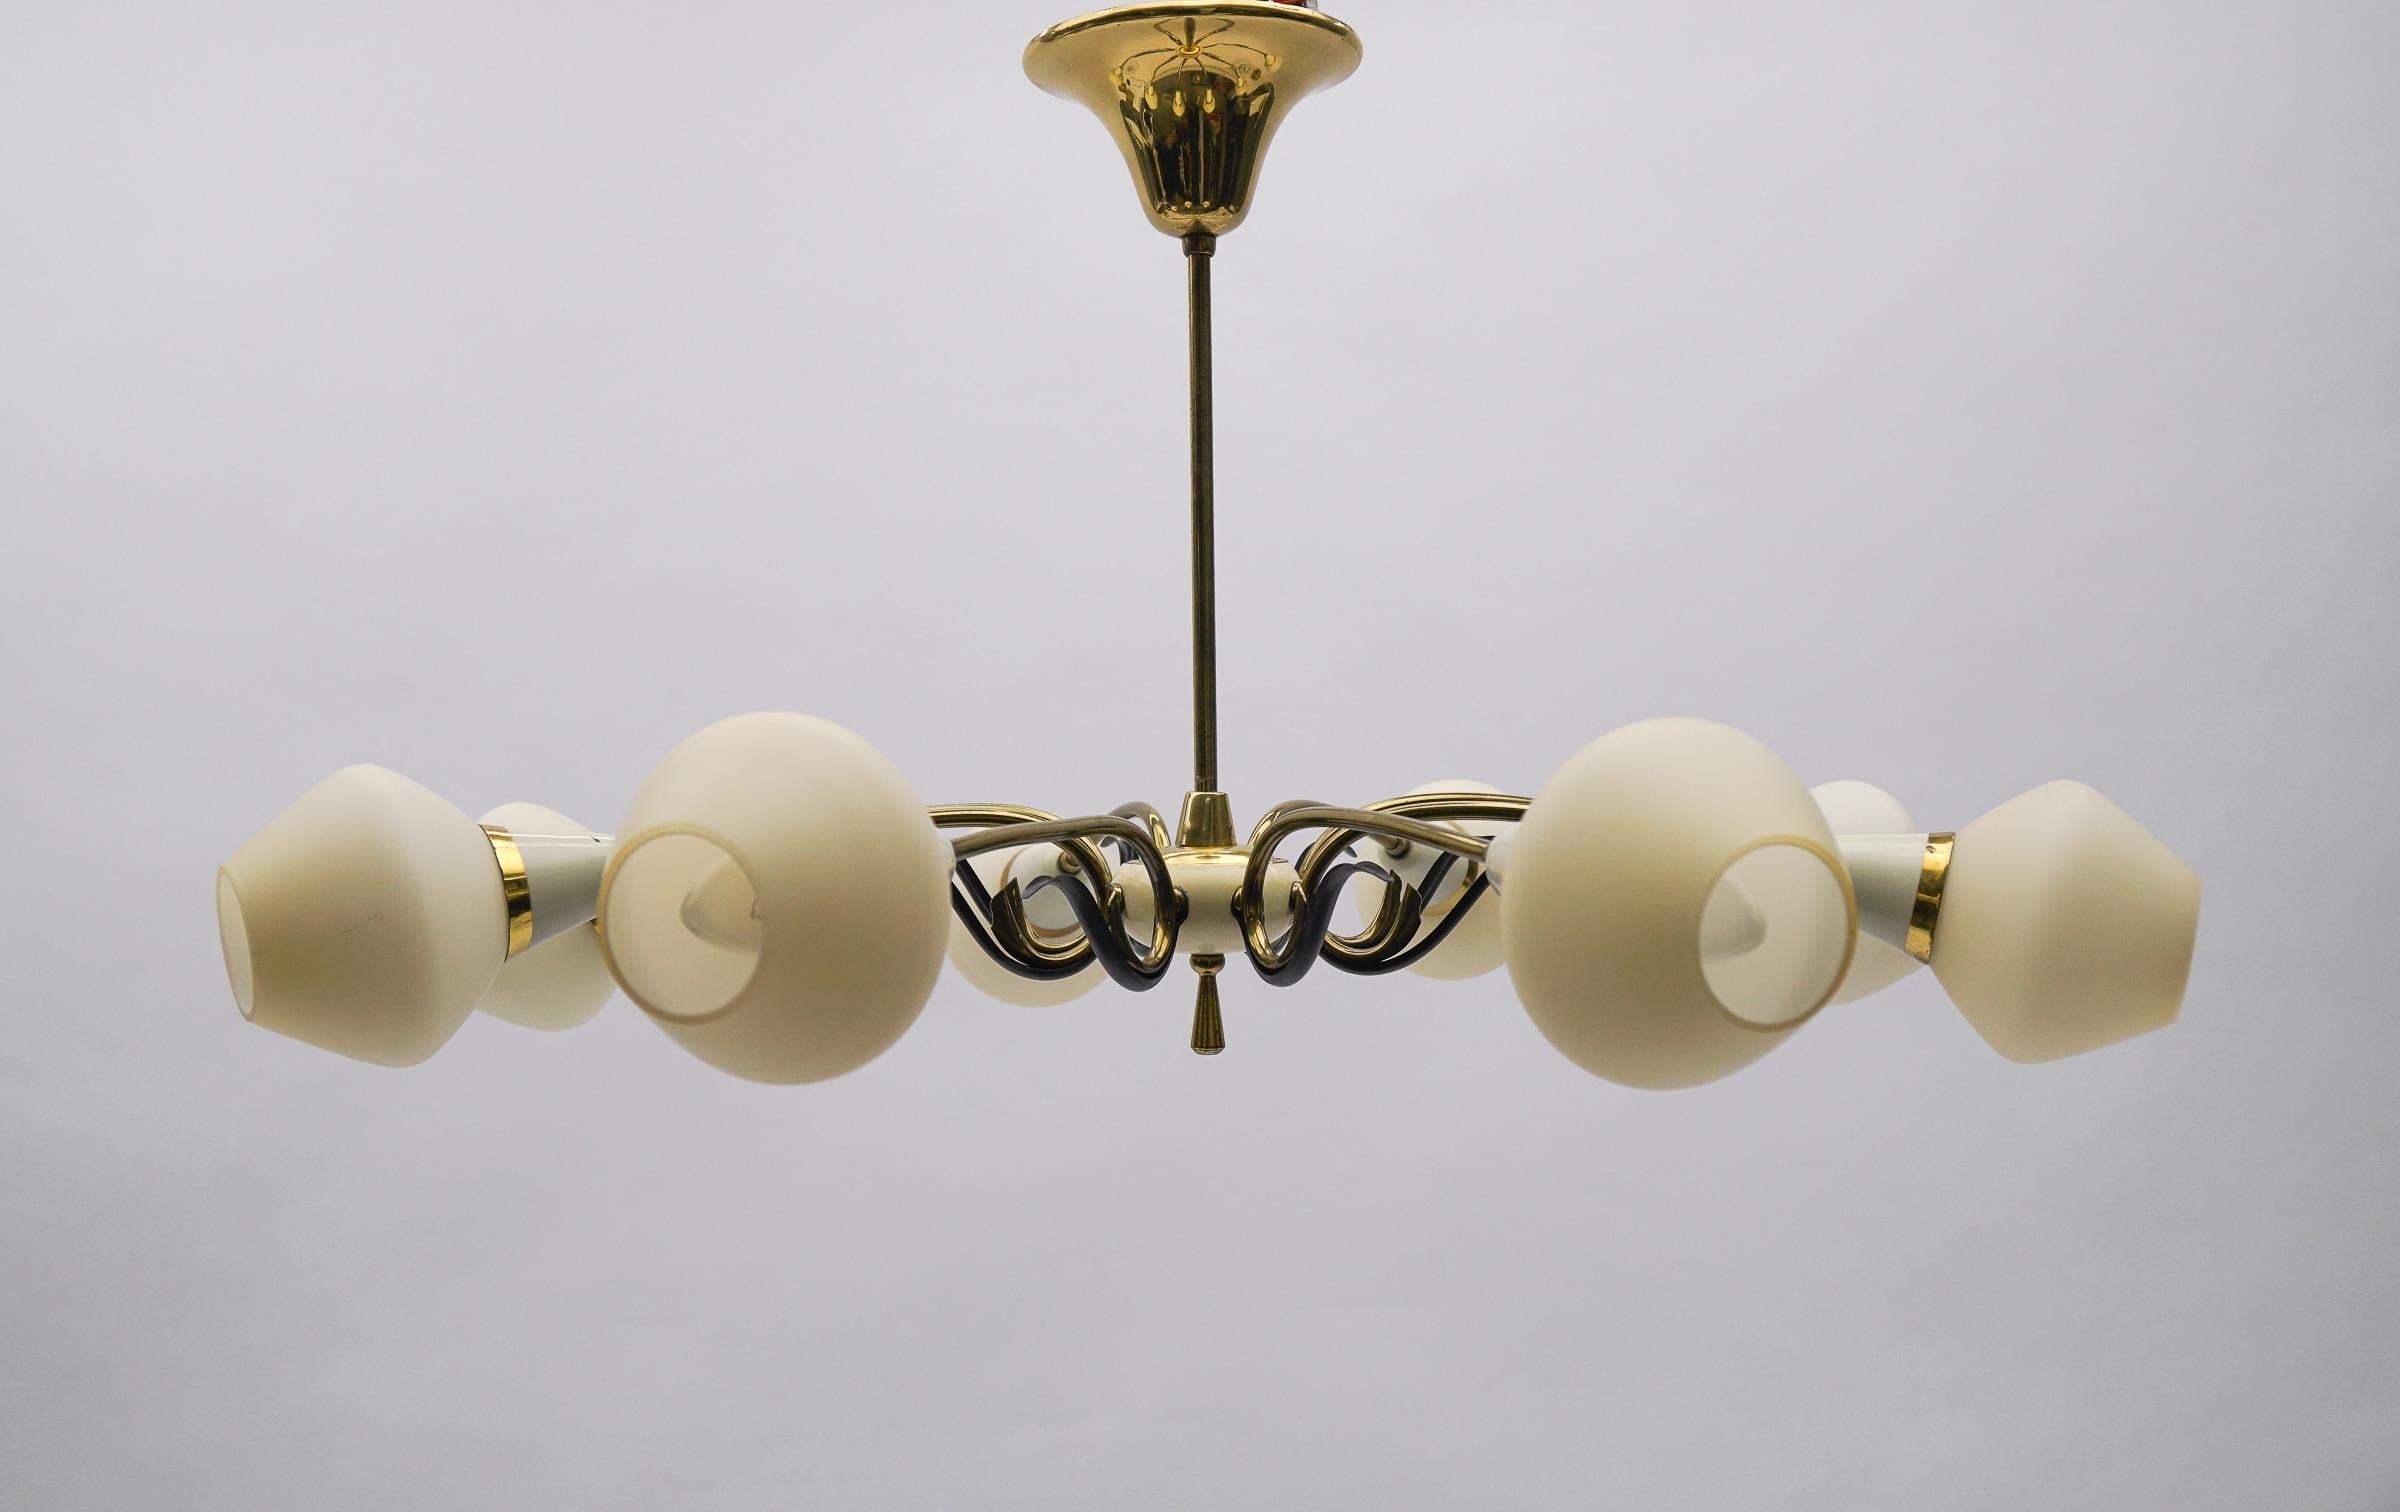 Executed in glass, brass and metal. The lamp needs 8 x E14 / E15 Edison screw fit bulb, is wired, in working condition and runs both on 110 / 230 volt.

Our lamps are checked, cleaned and are suitable for use in the USA.